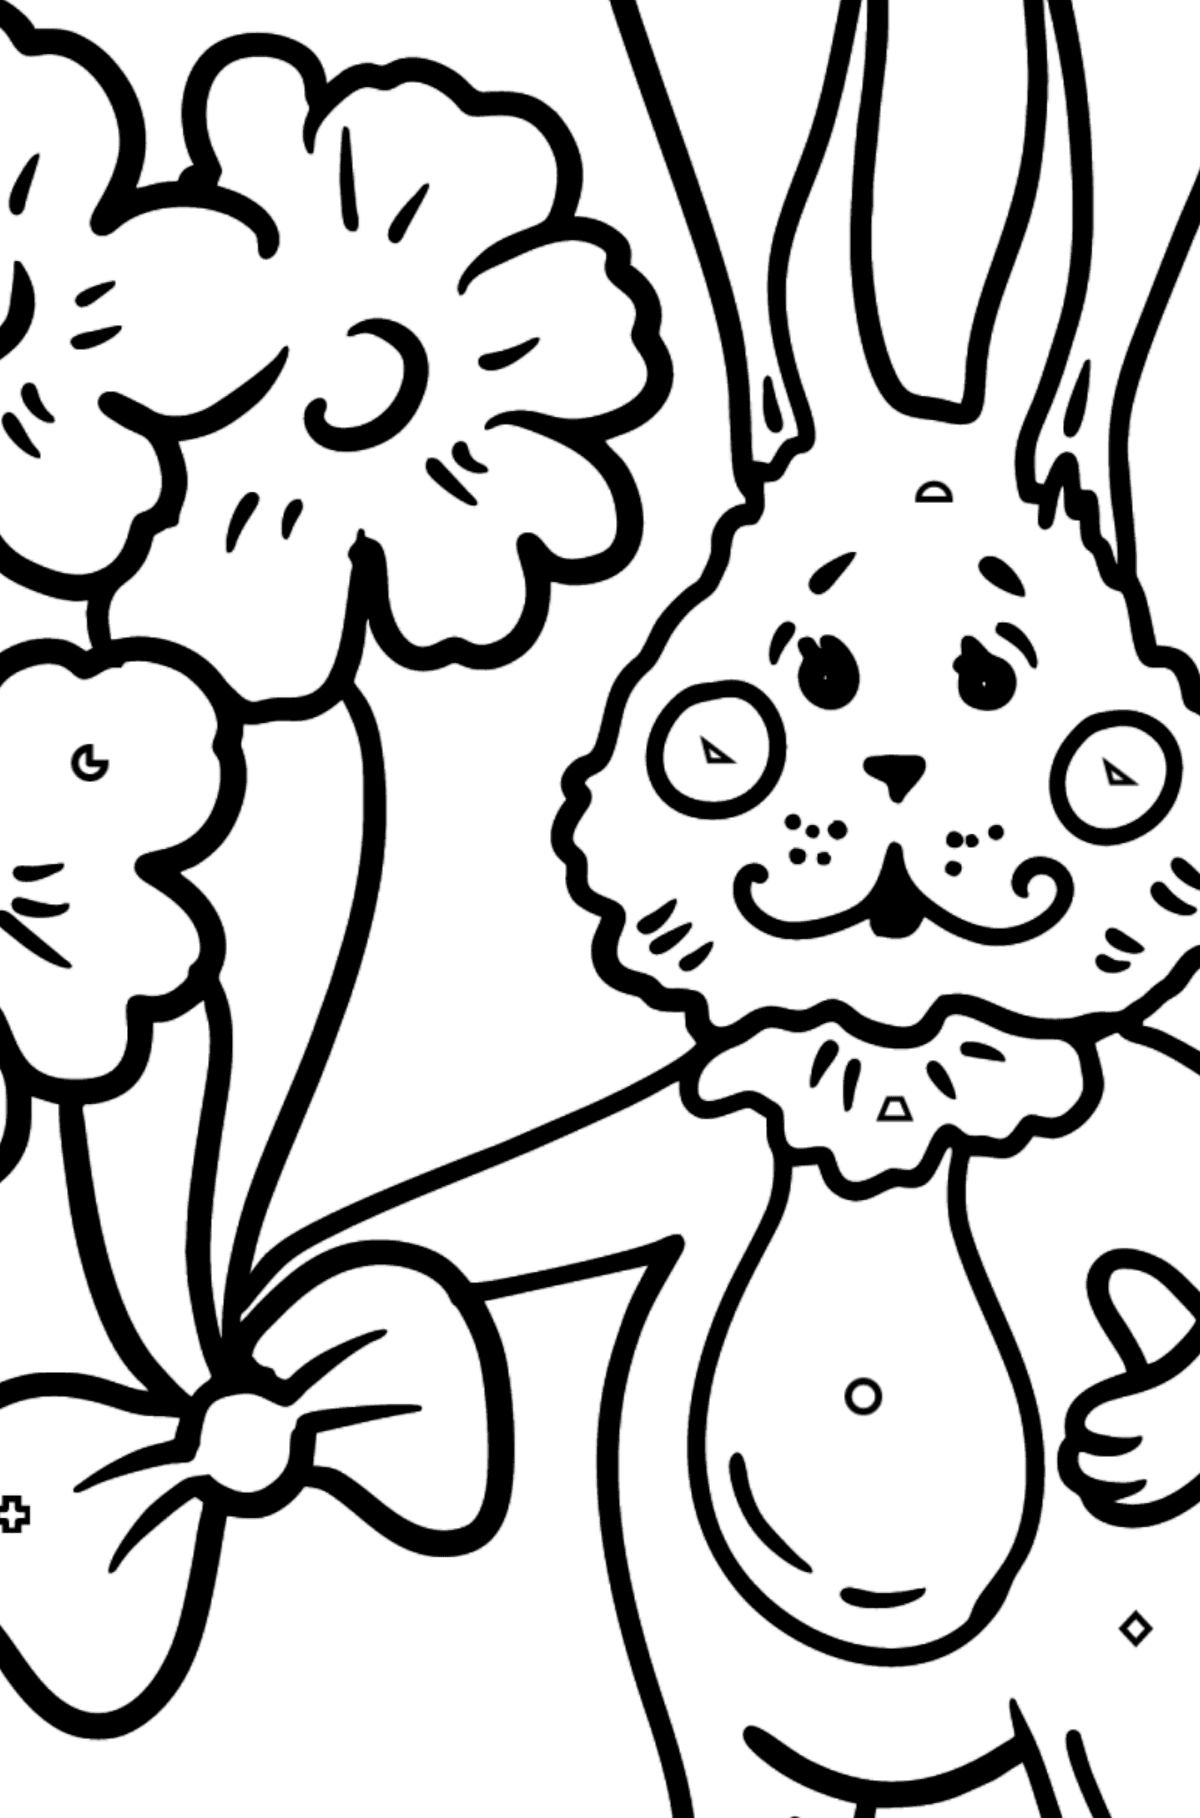 Bunny with a Bouquet of Flowers coloring page - Coloring by Geometric Shapes for Kids